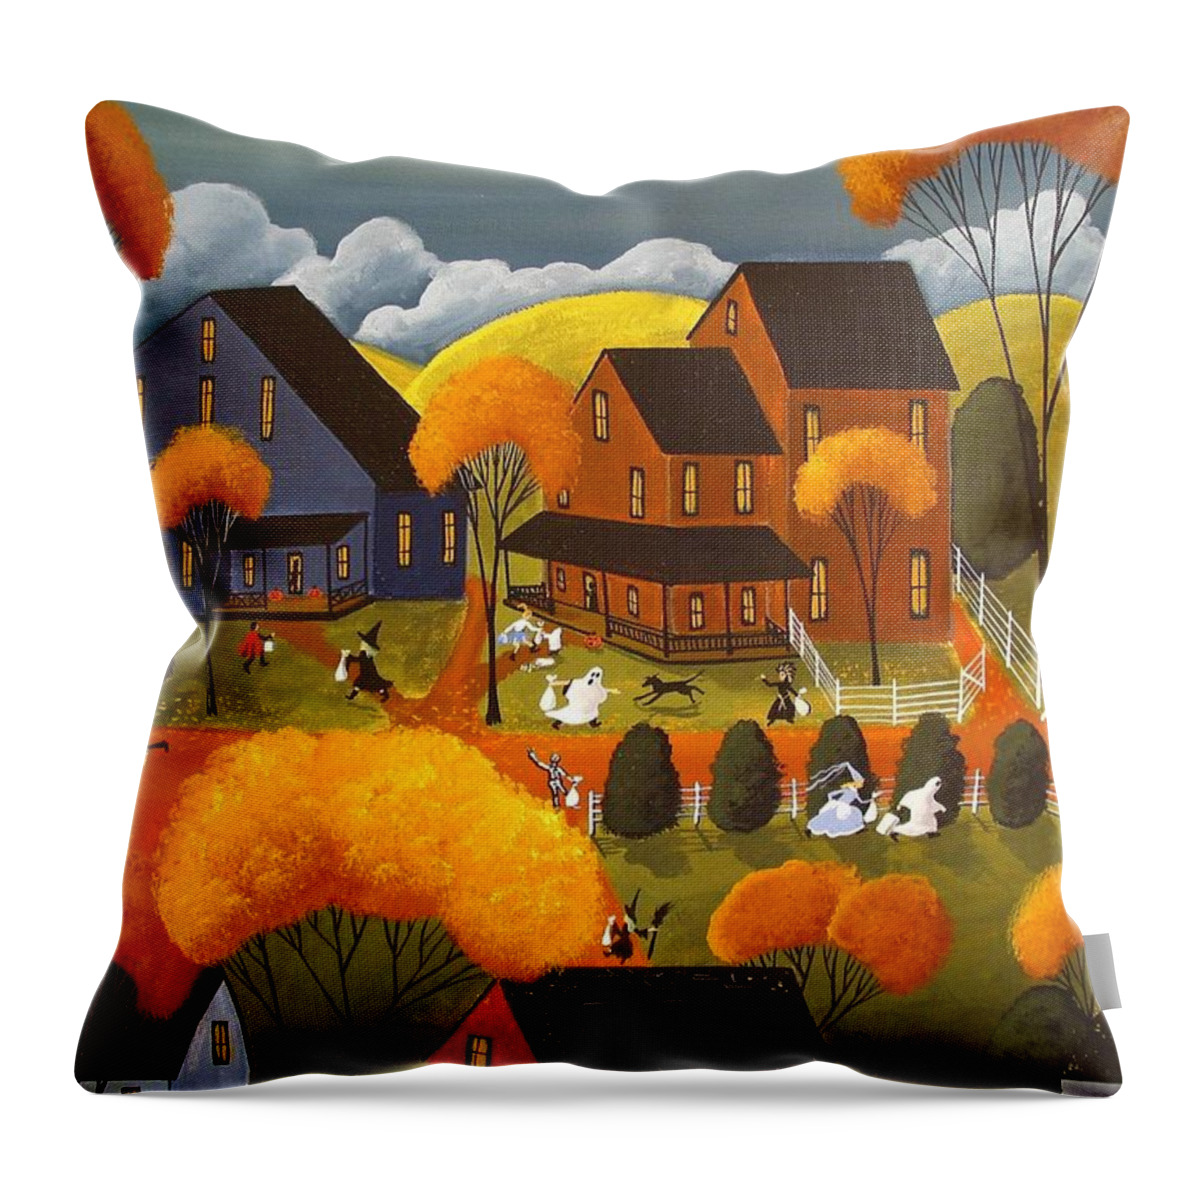 Halloween Throw Pillow featuring the painting Trick Or Treat 2007 by Debbie Criswell